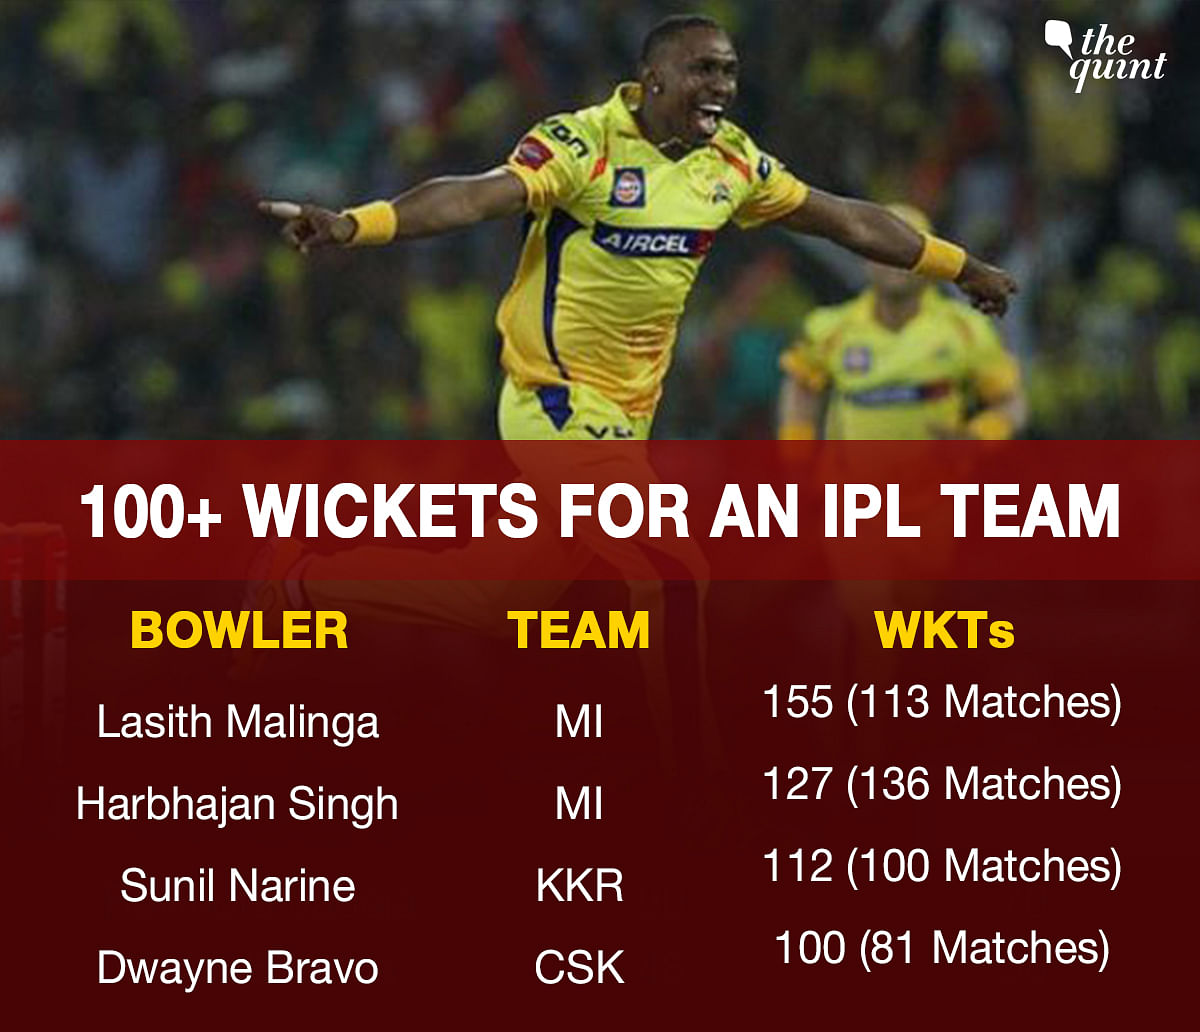 Dwayne Bravo became the first bowler to take 100 wickets for CSK in the IPL during the match against Mumbai Indians.